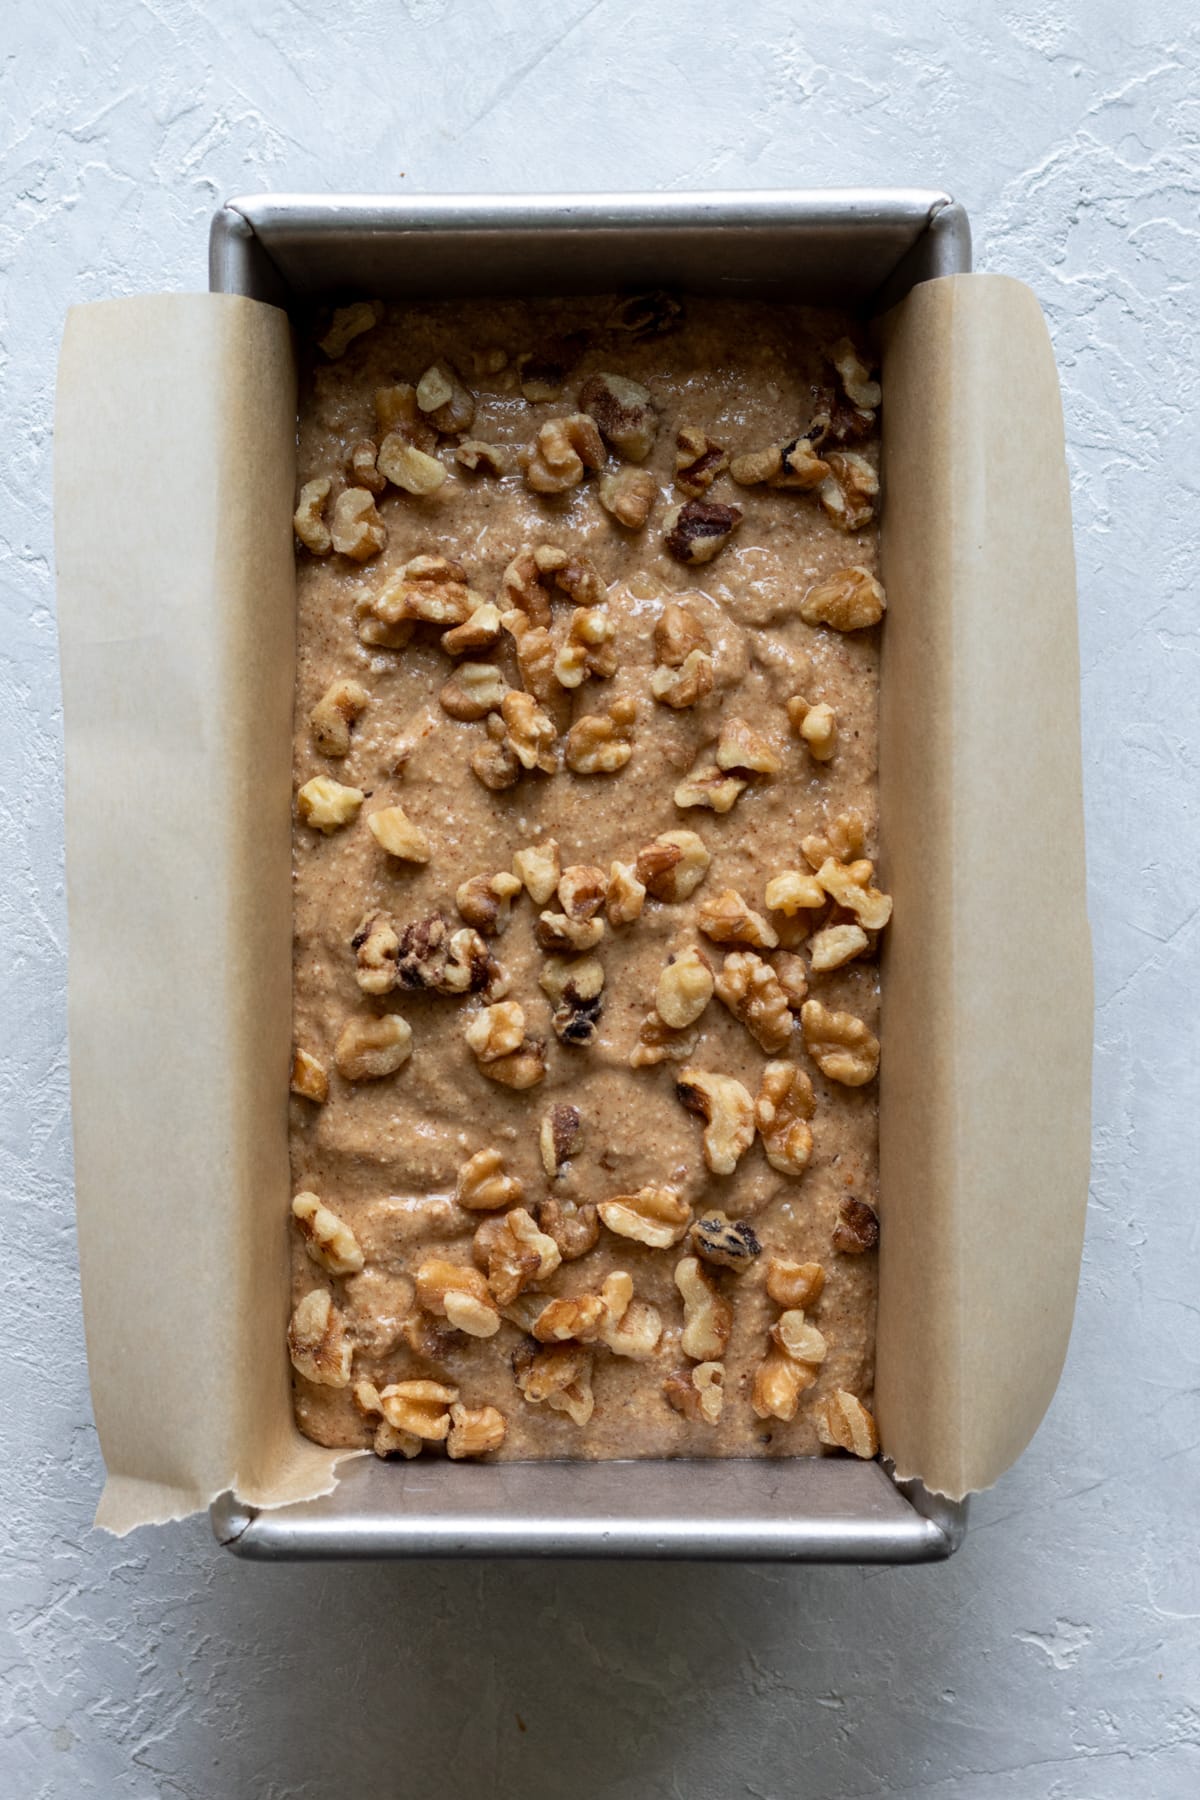 banana bread batter in parchment lined pan sprinkled with walnuts.